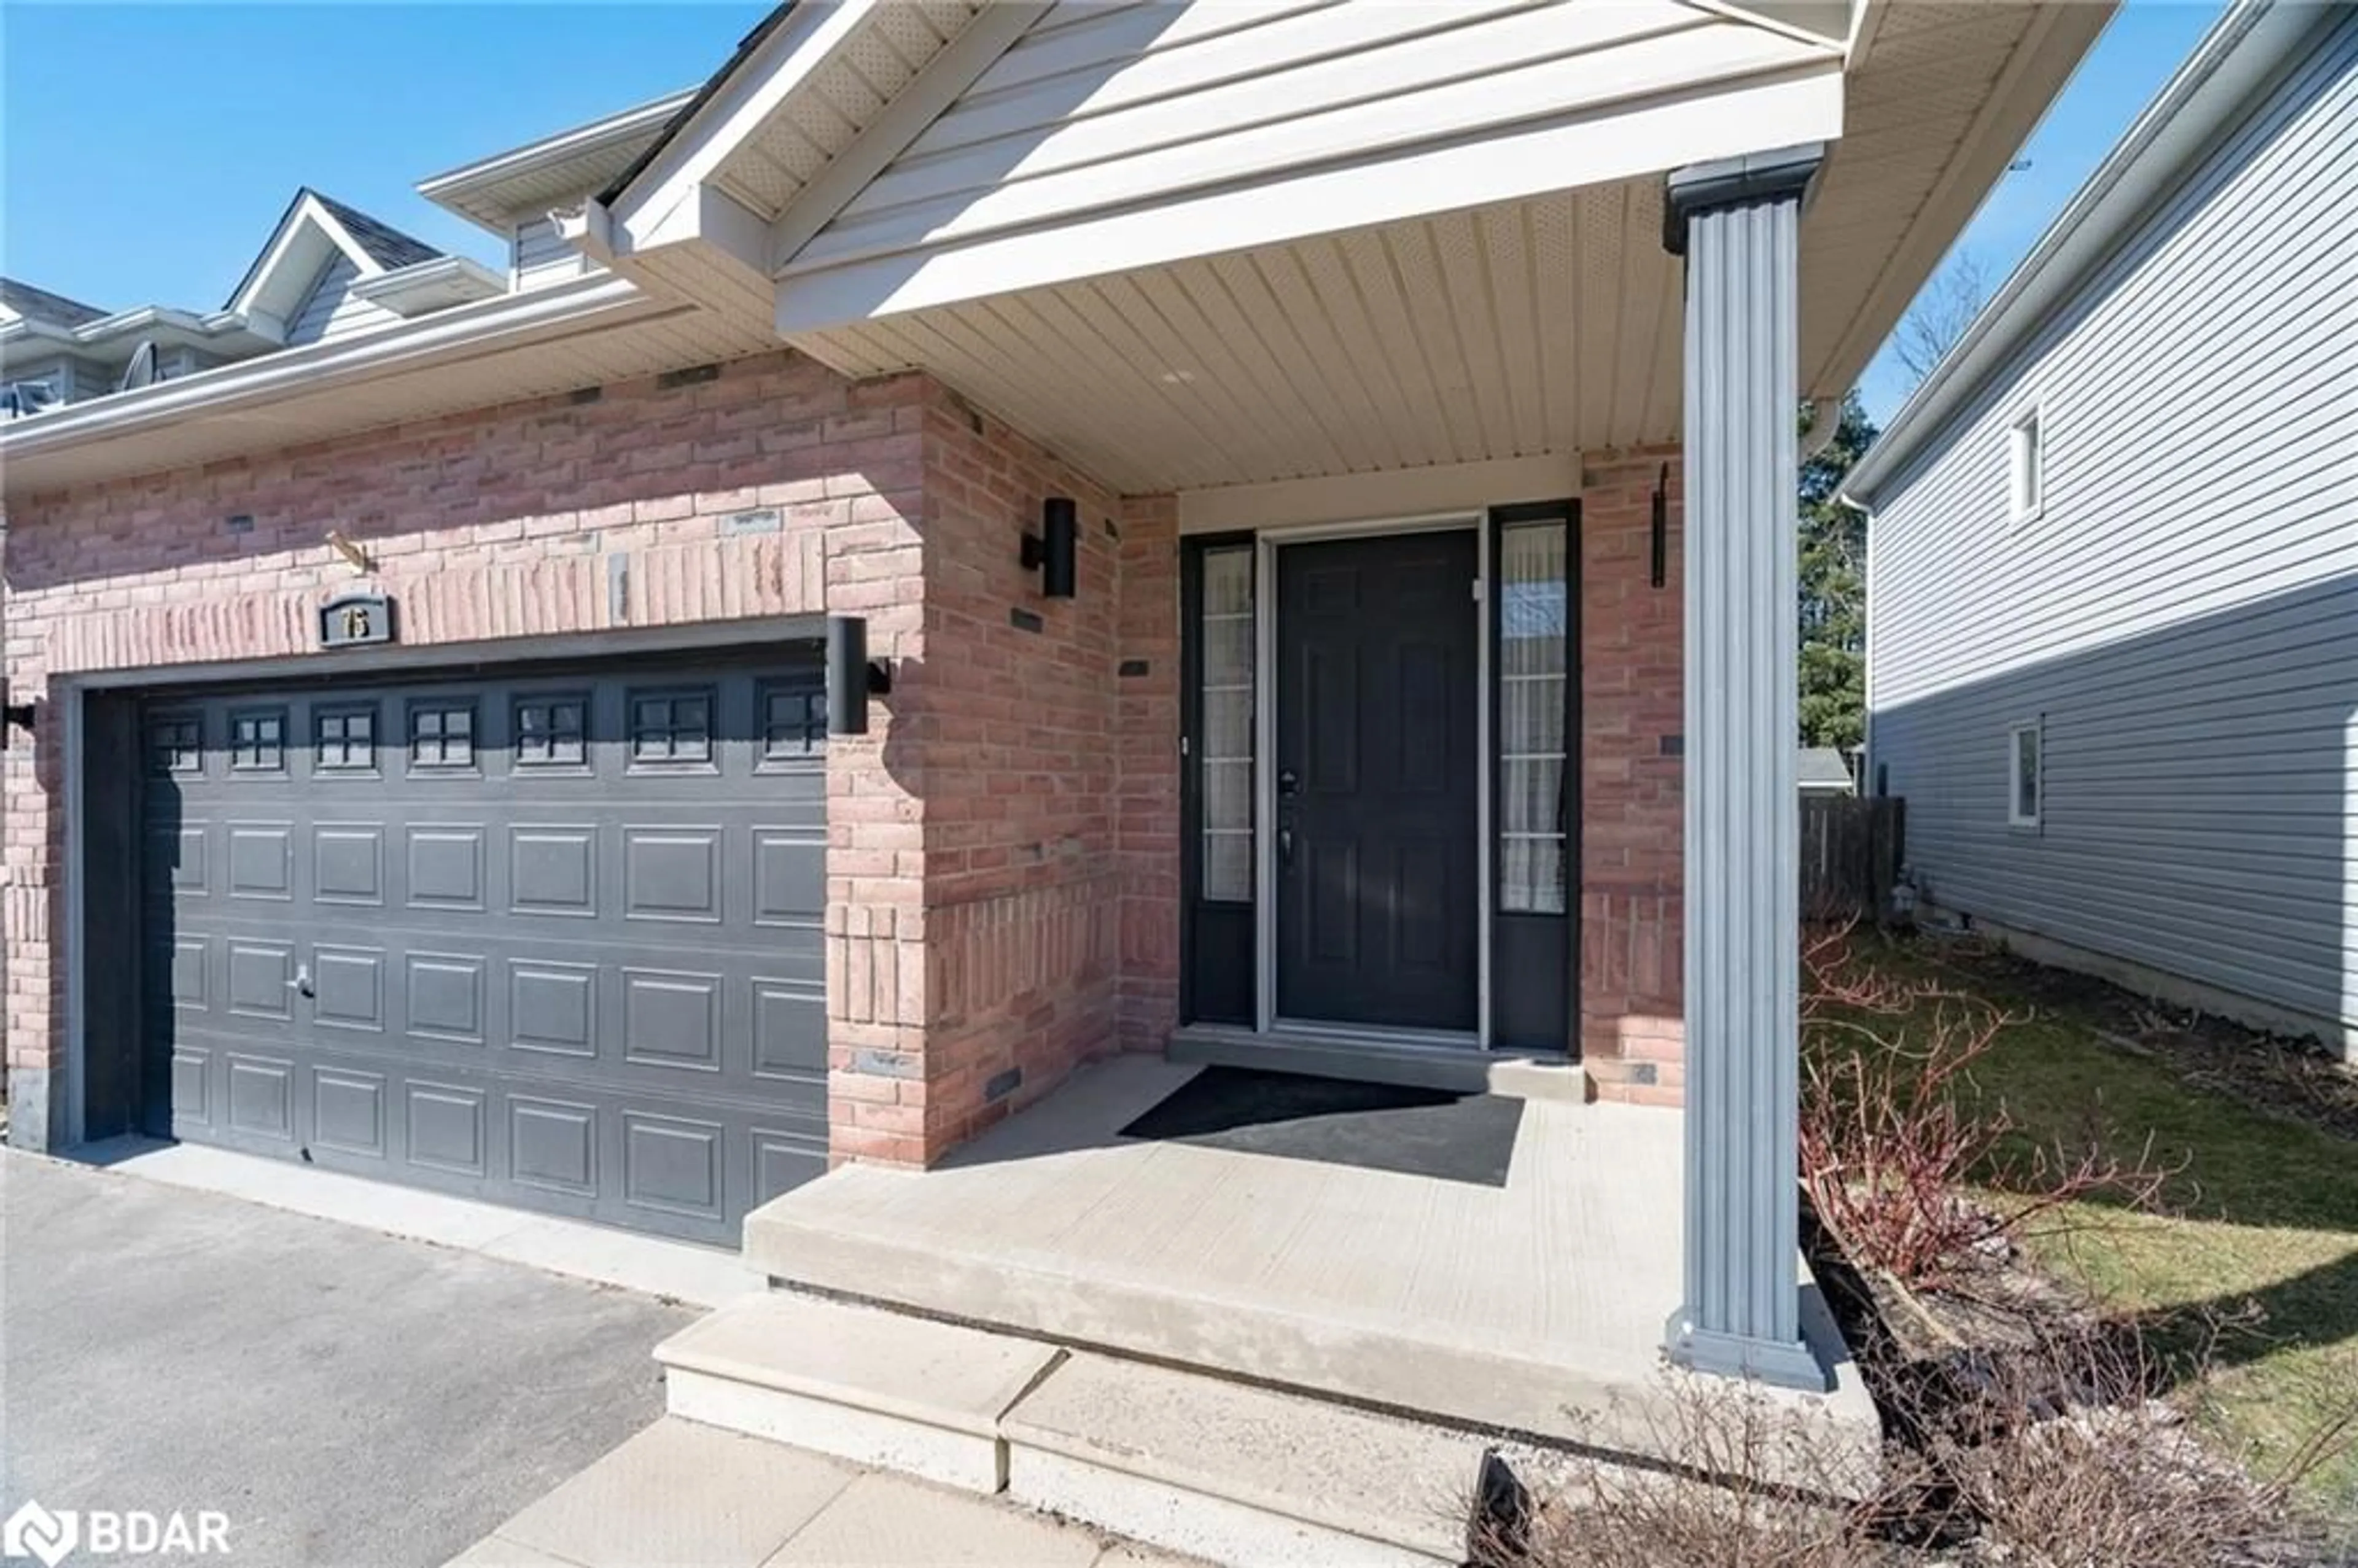 Home with brick exterior material for 75 Maplewood Dr, Angus Ontario L0L 1B4